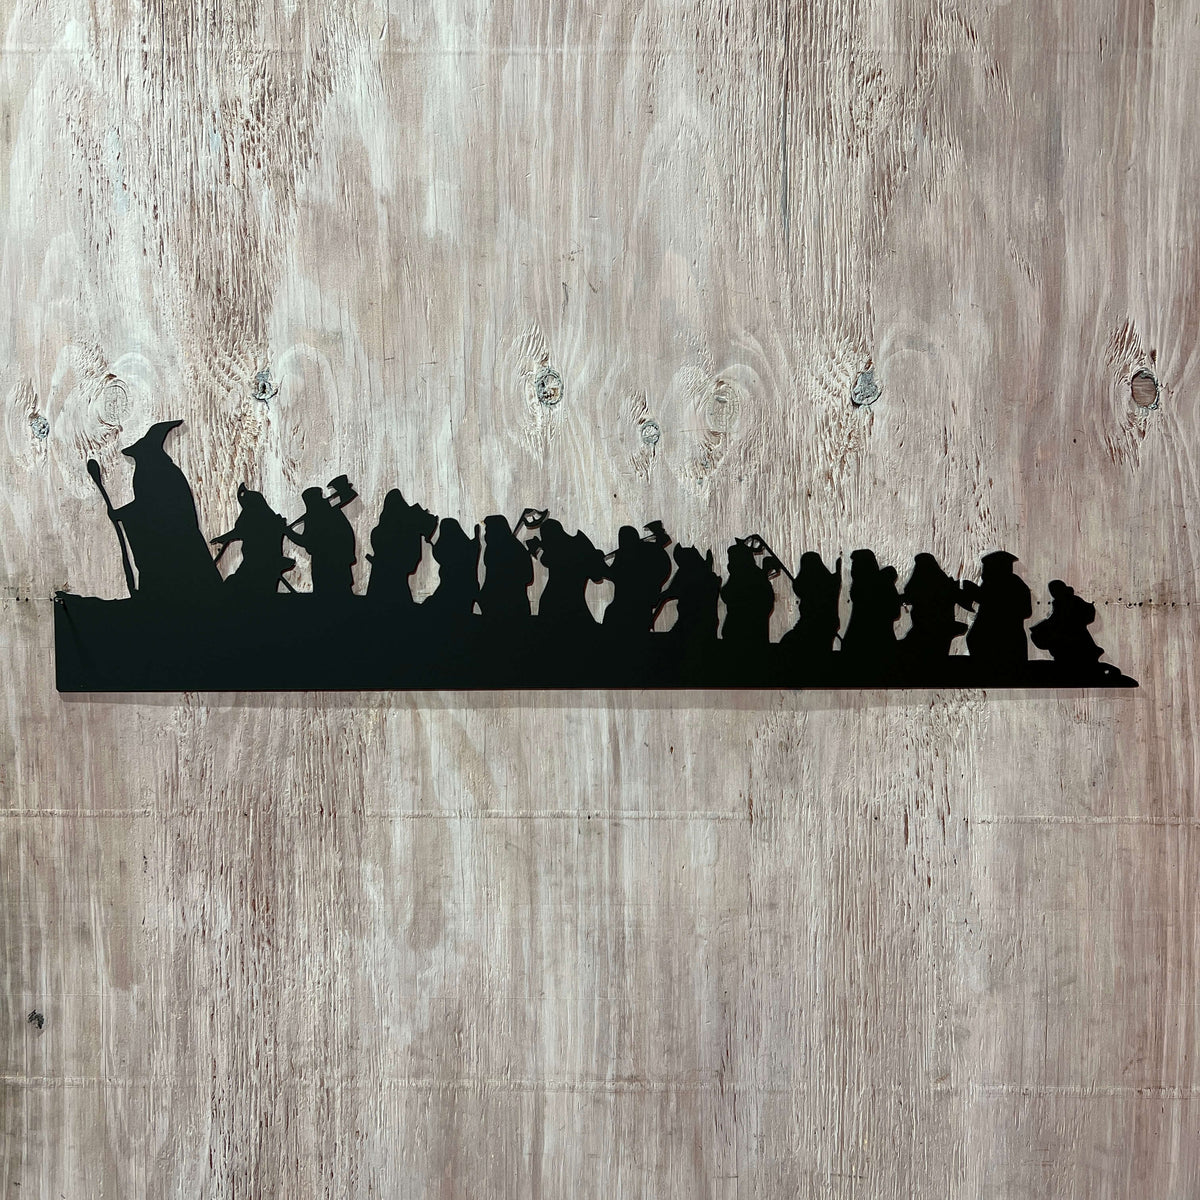 Lord of the Rings Hobbit Silhouette | Metal Wall Art | 23" | #LotR